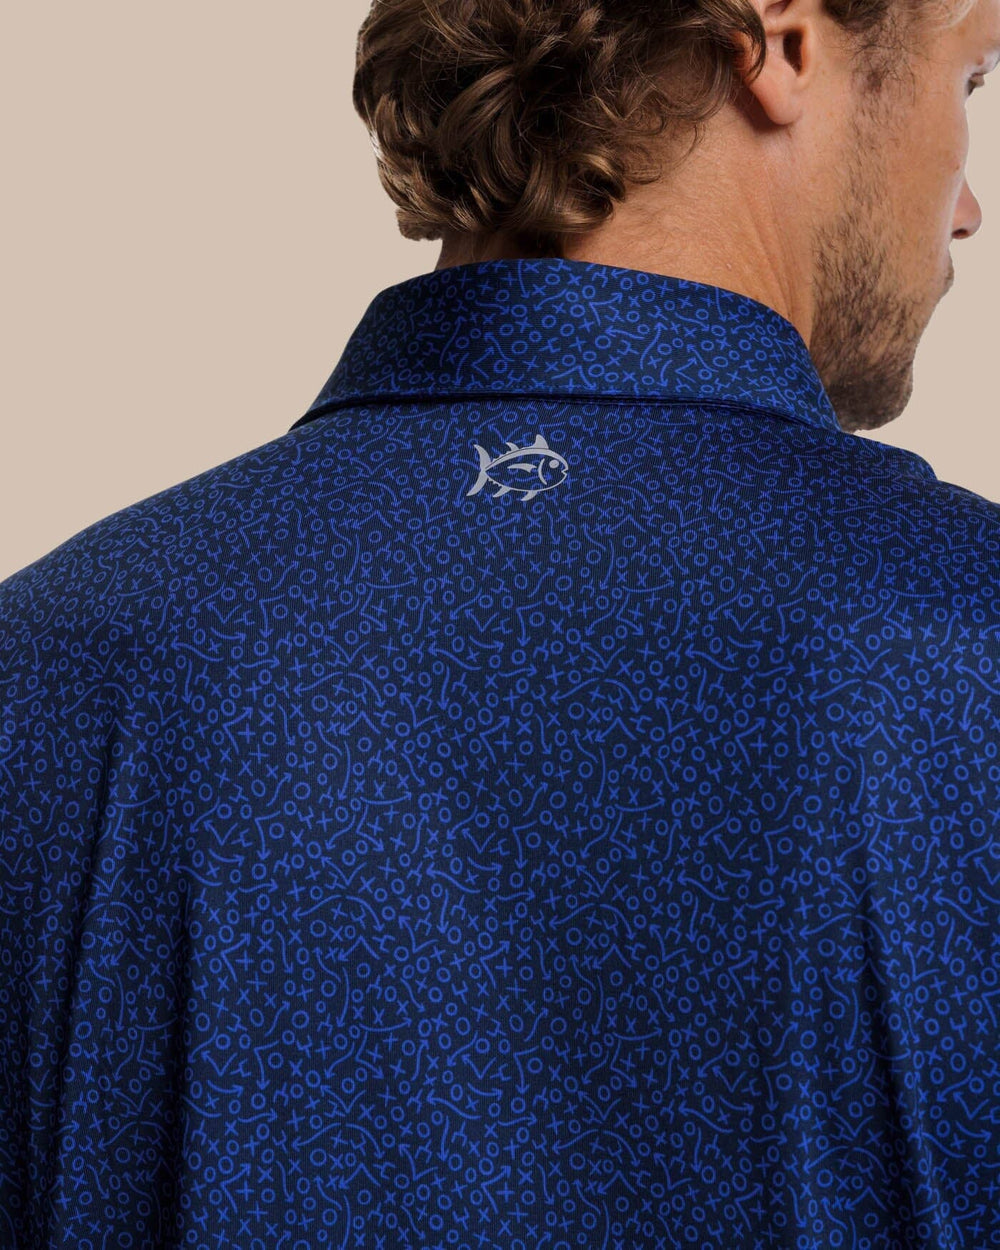 The yoke view of the Southern Tide Driver Gameplay Polo by Southern Tide - Navy